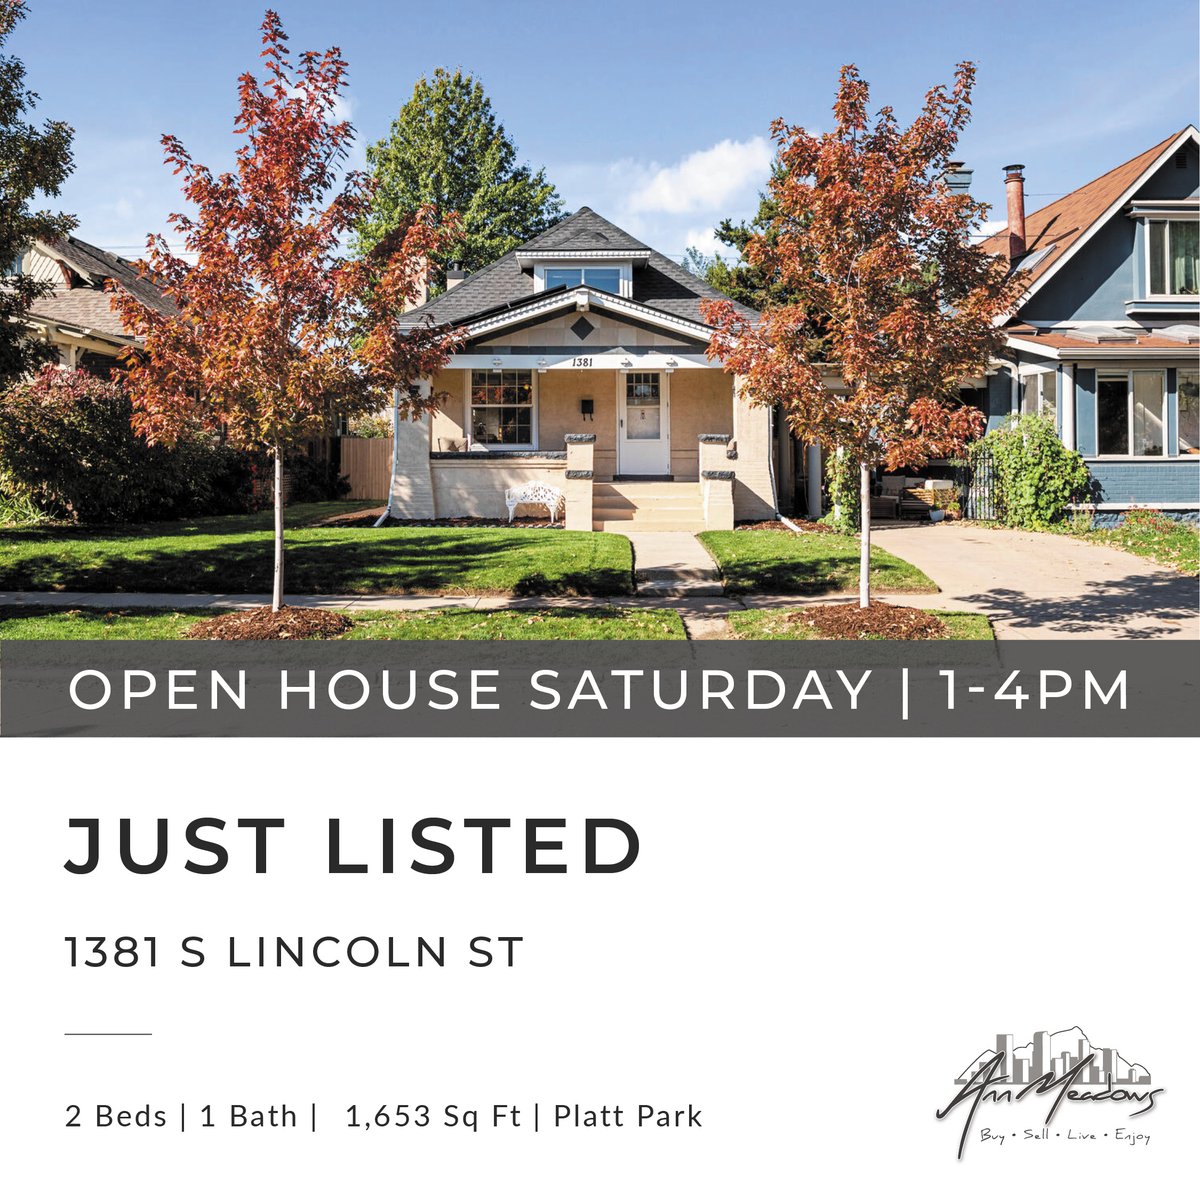 Come visit our Open House on Saturday at this charming #PlattPark bungalow! Come by and say hello – we’d love to show you around! #denverbungalow #denverlisting #historiccharm #denveropenhouse #annsellsdenver